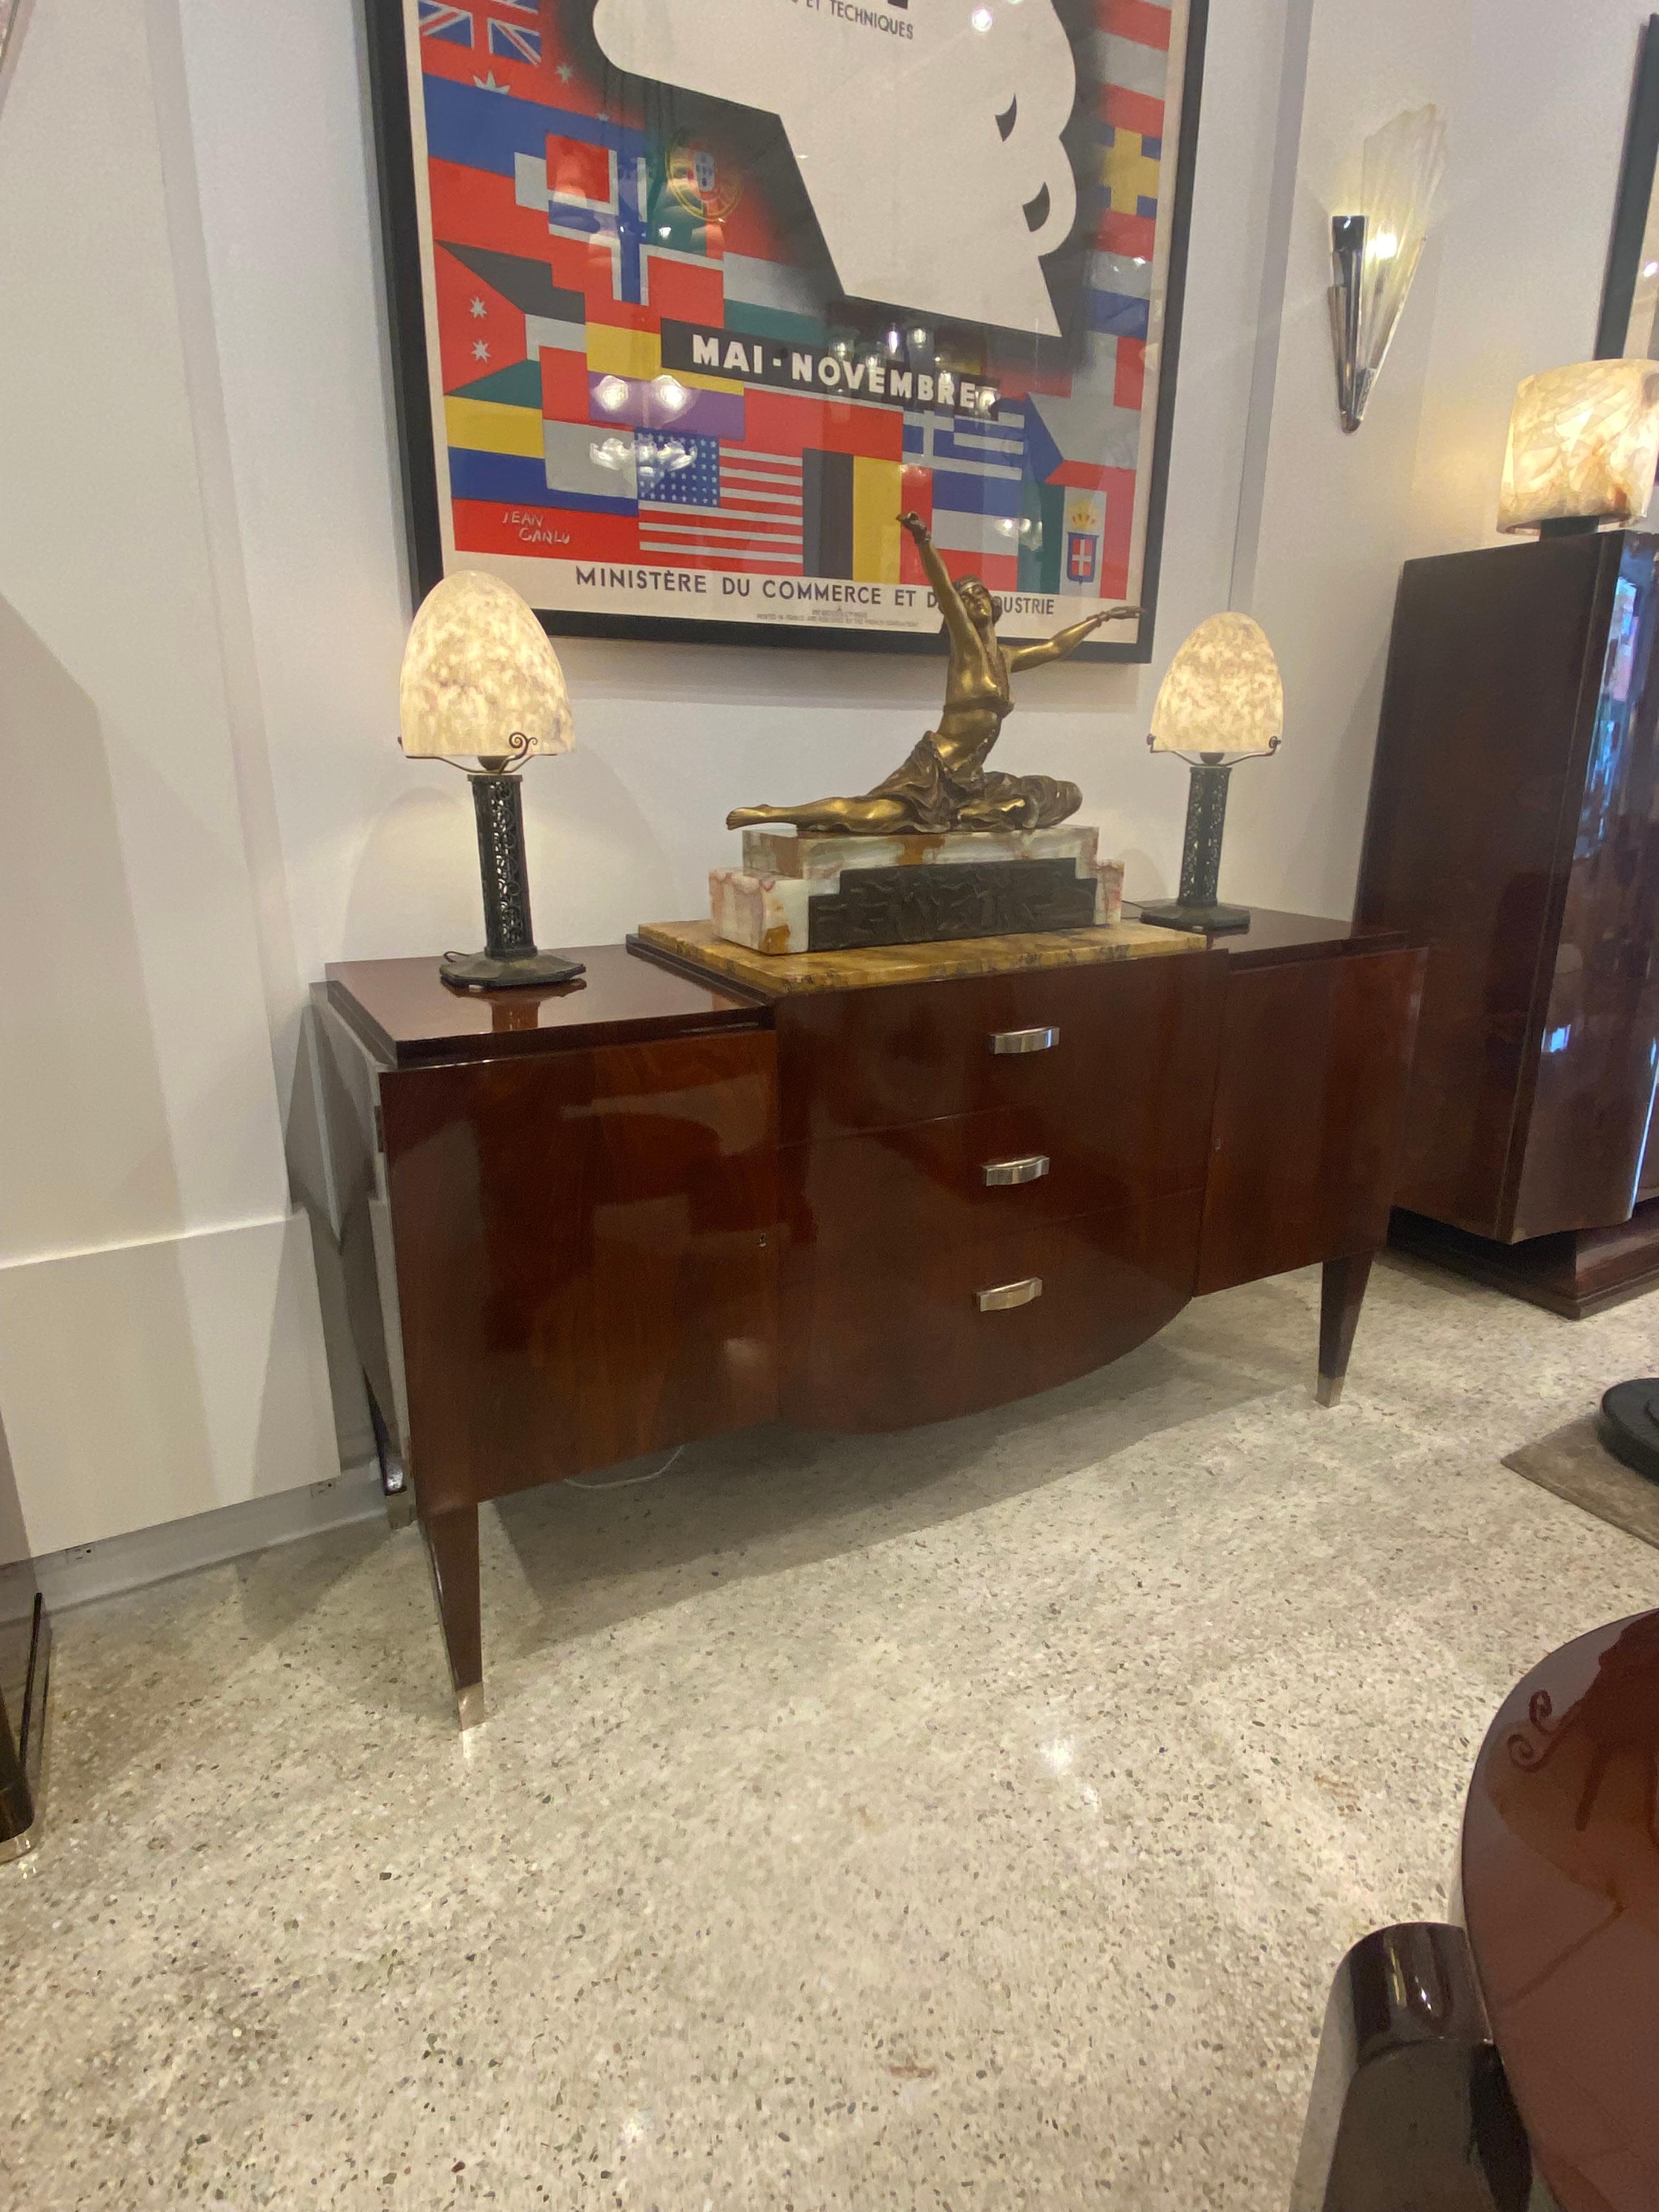 Art Deco sideboard by Krieger Company under Louis Sognot design and direction, made of Rio rosewood veneer and solid oak frame topped with Siena marble (Italy).
Made in France
Circa: 1930
Signature: 